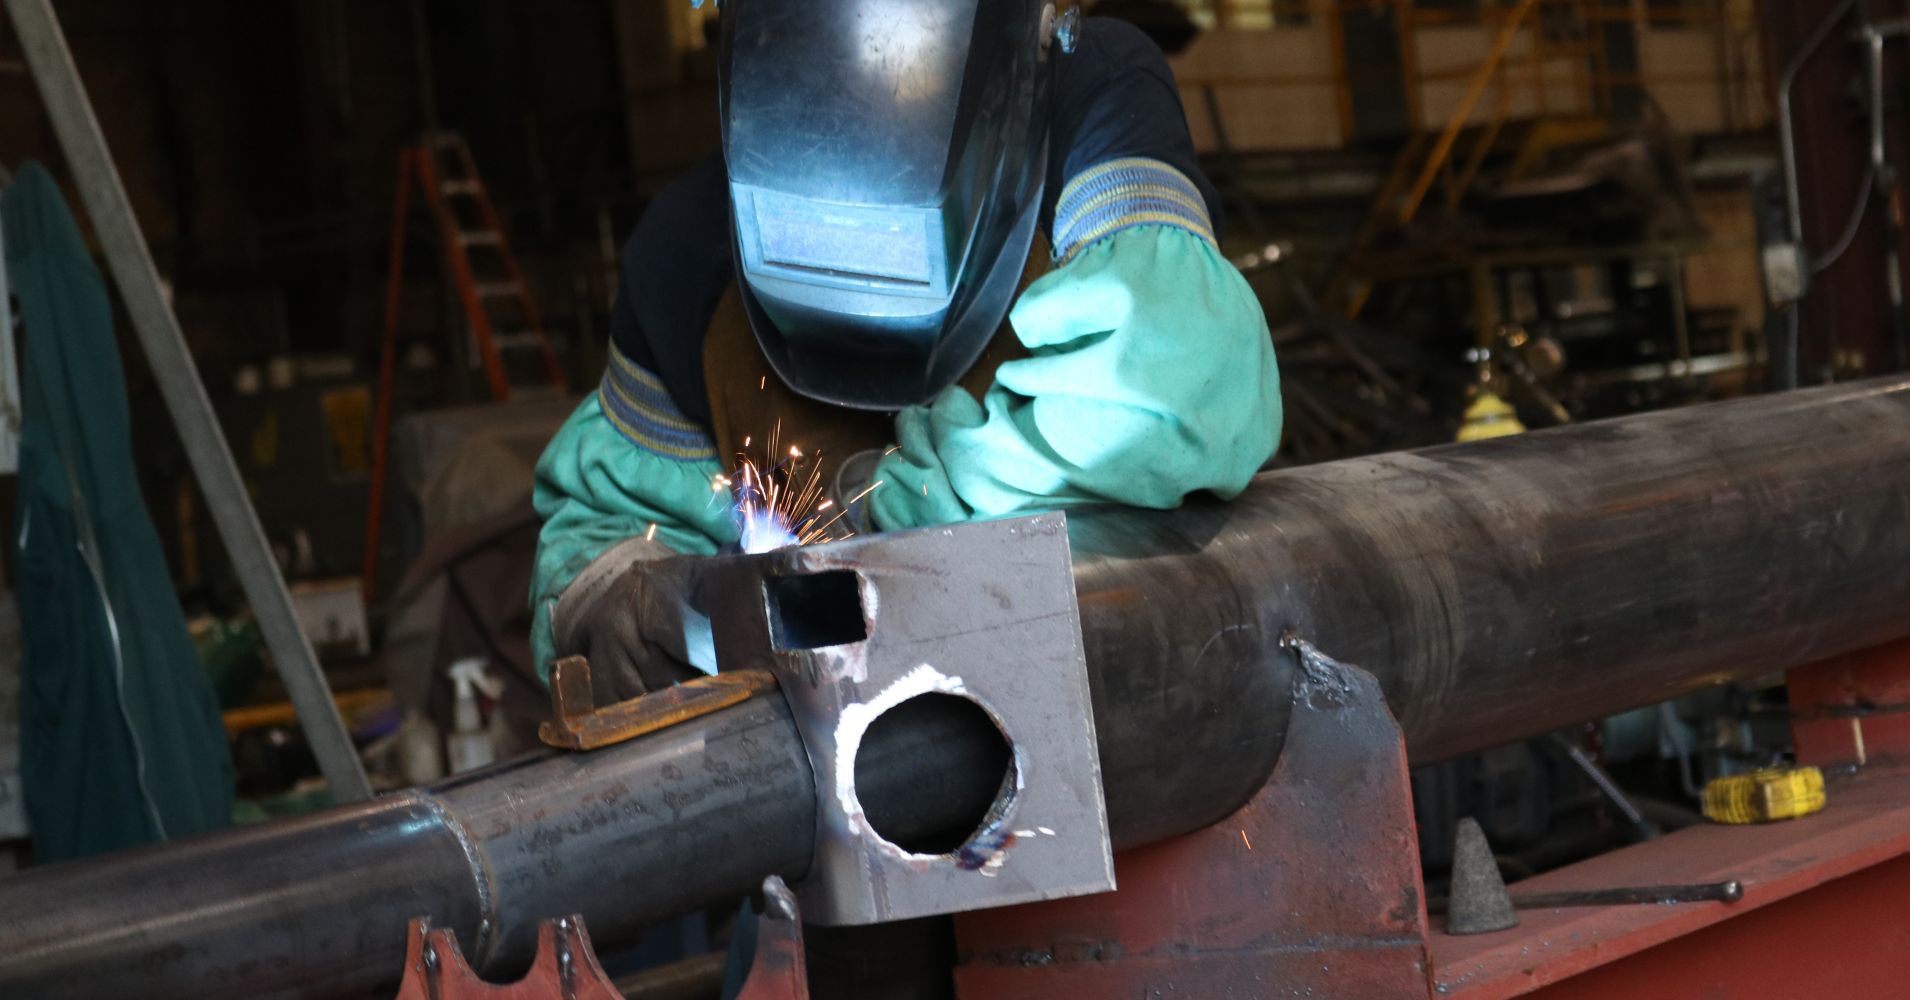 ORANGE COUNTY - AUGUST 7: A welder working on a steel piece at a metal fabrication company on August 7, 2018 in Orange County, New York.